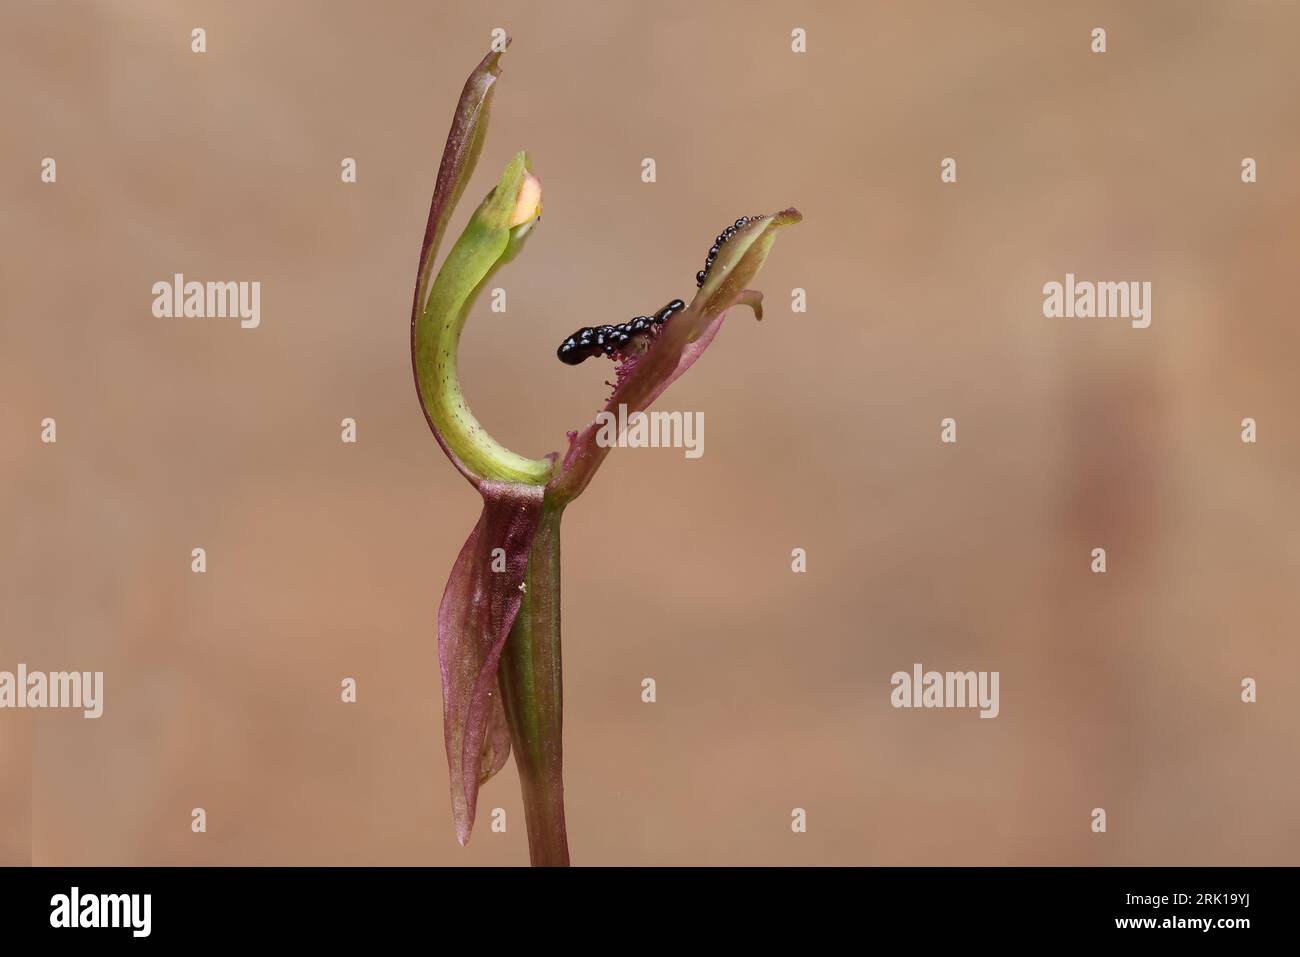 Australian Common Ant Orchid with brown rock background Stock Photo